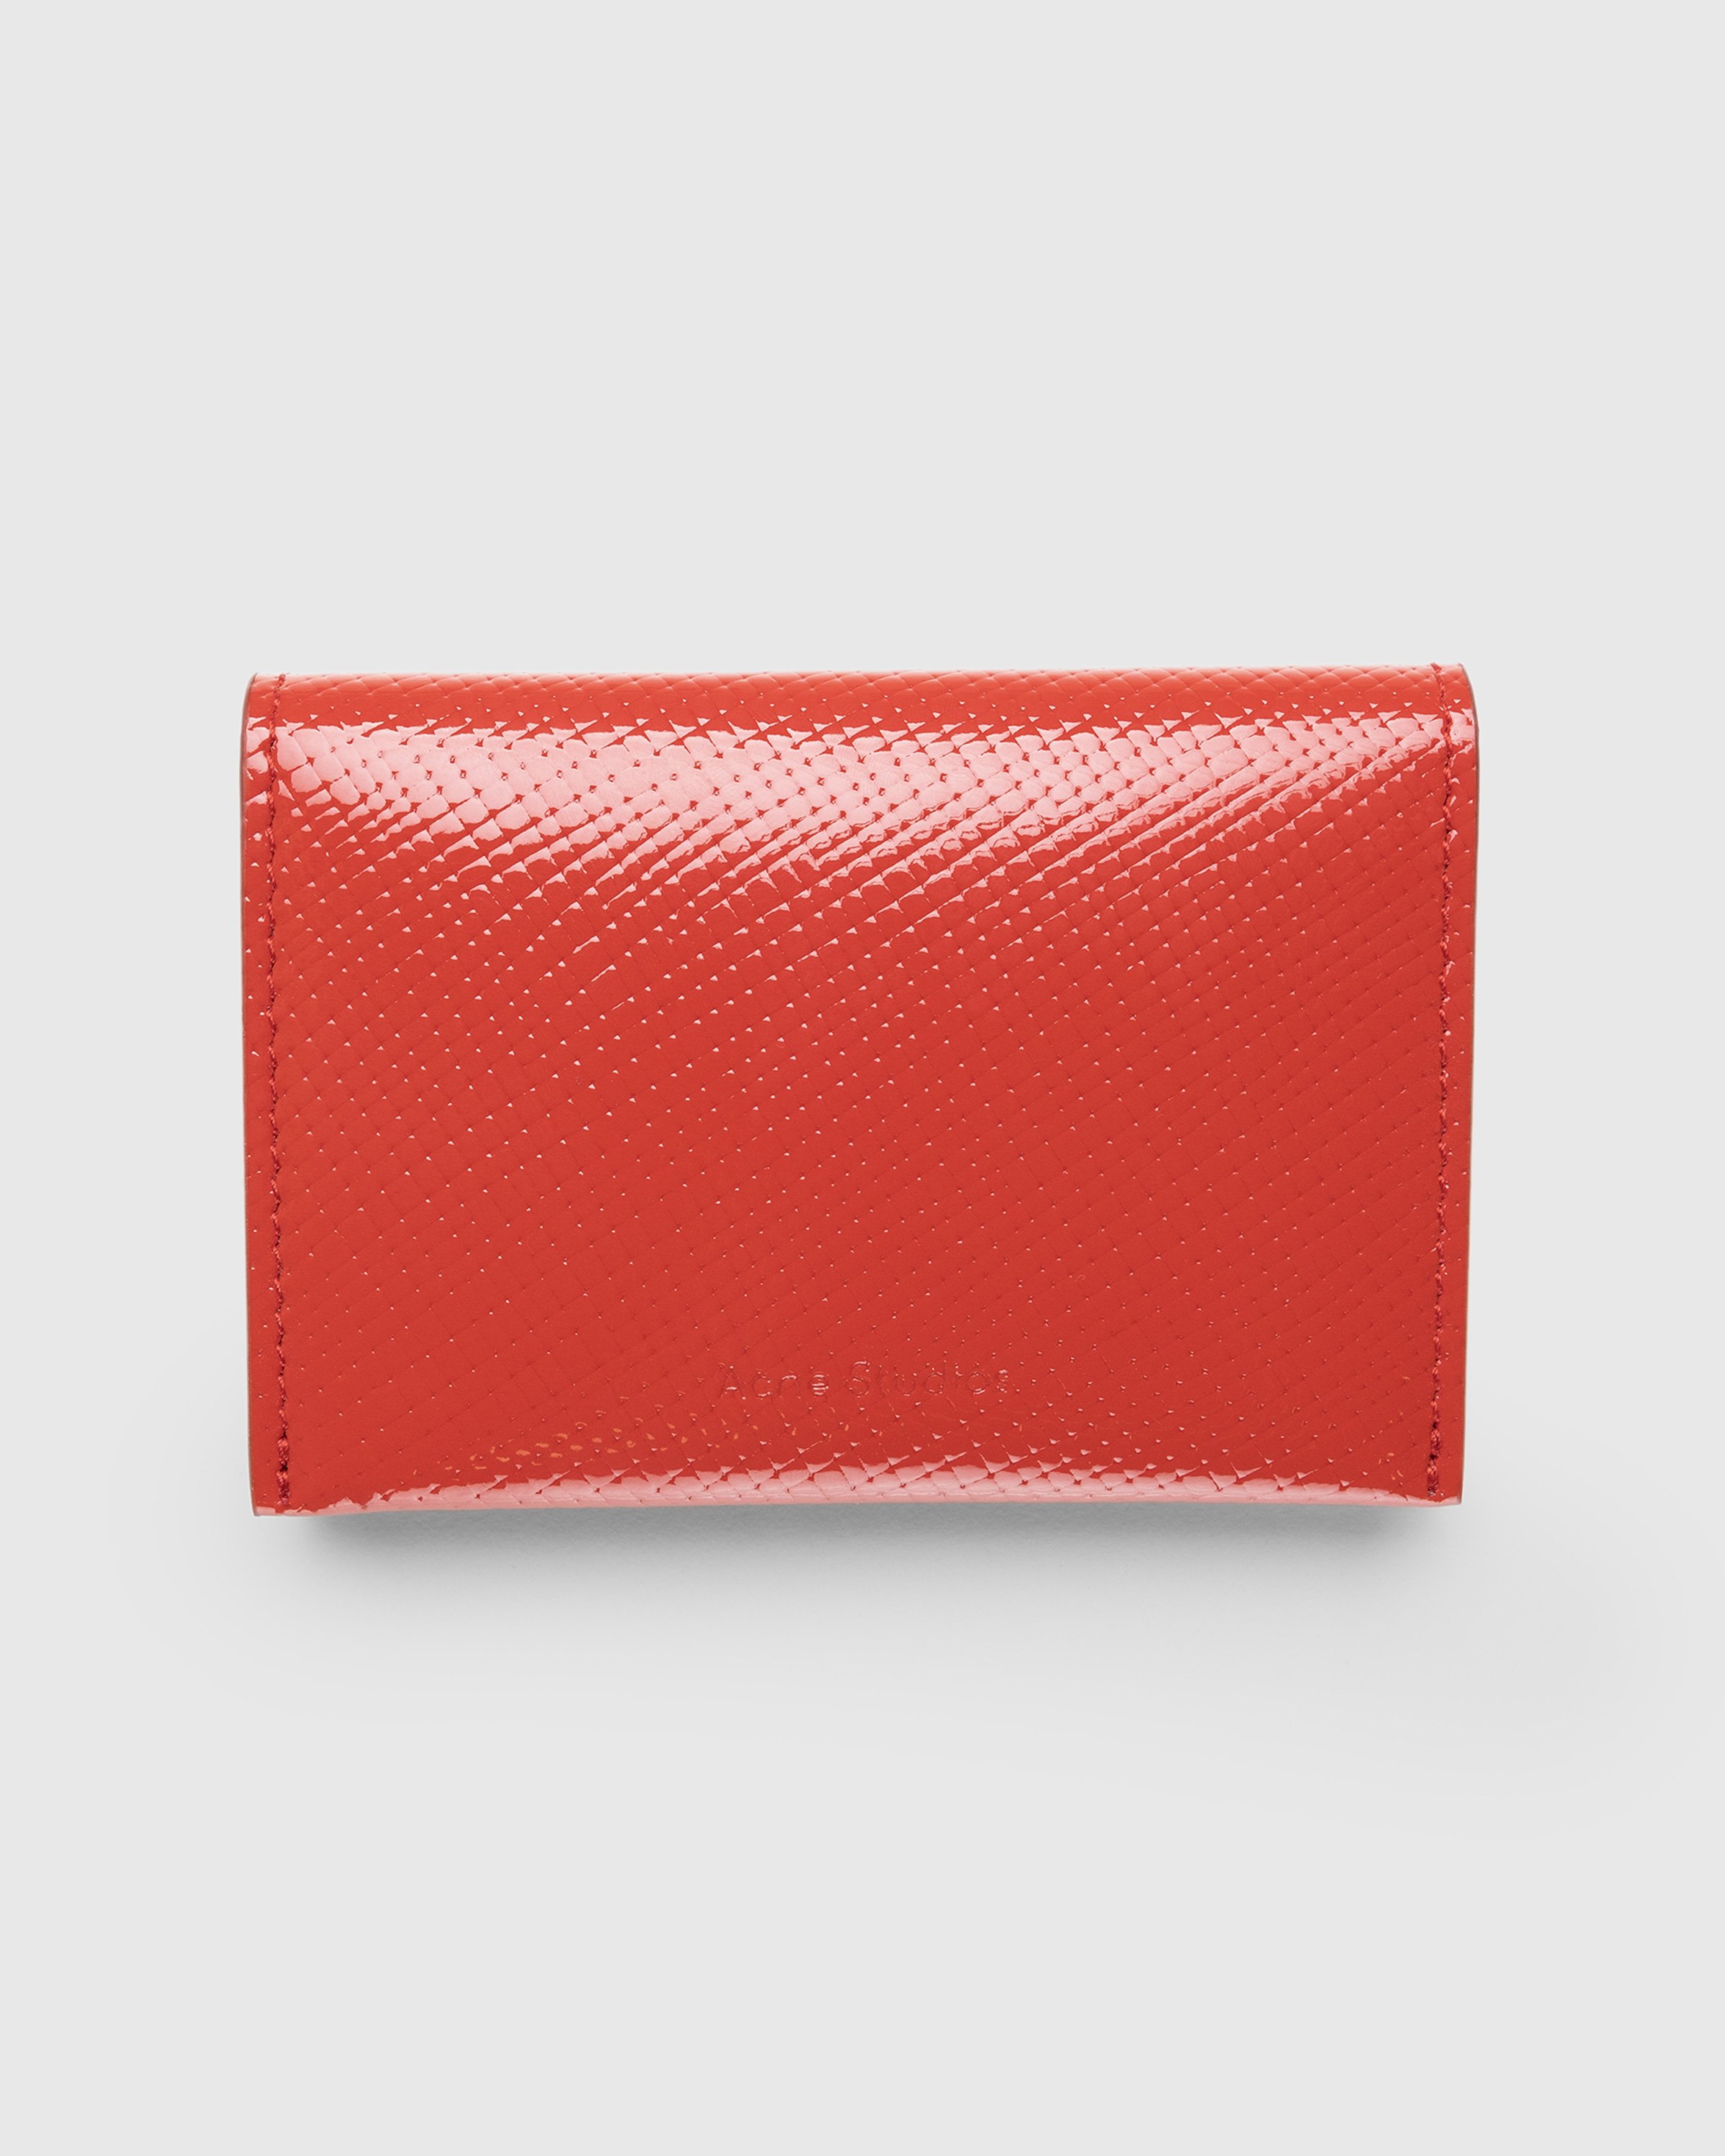 Acne Studios - Folded Card Holder Red - Accessories - Red - Image 1